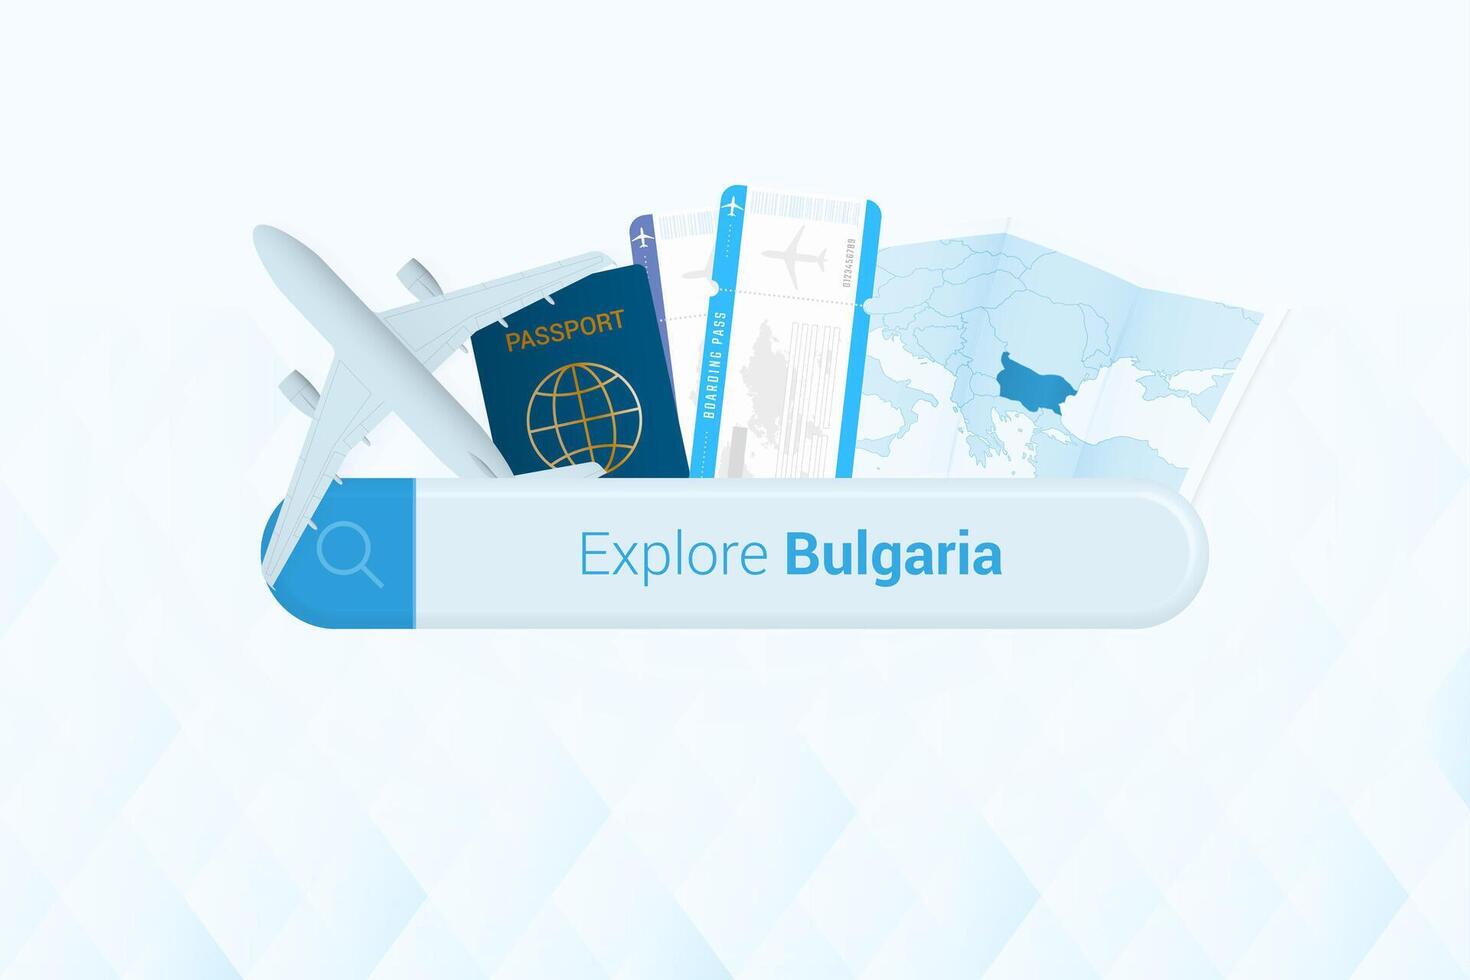 Searching tickets to Bulgaria or travel destination in Bulgaria. Searching bar with airplane, passport, boarding pass, tickets and map. vector